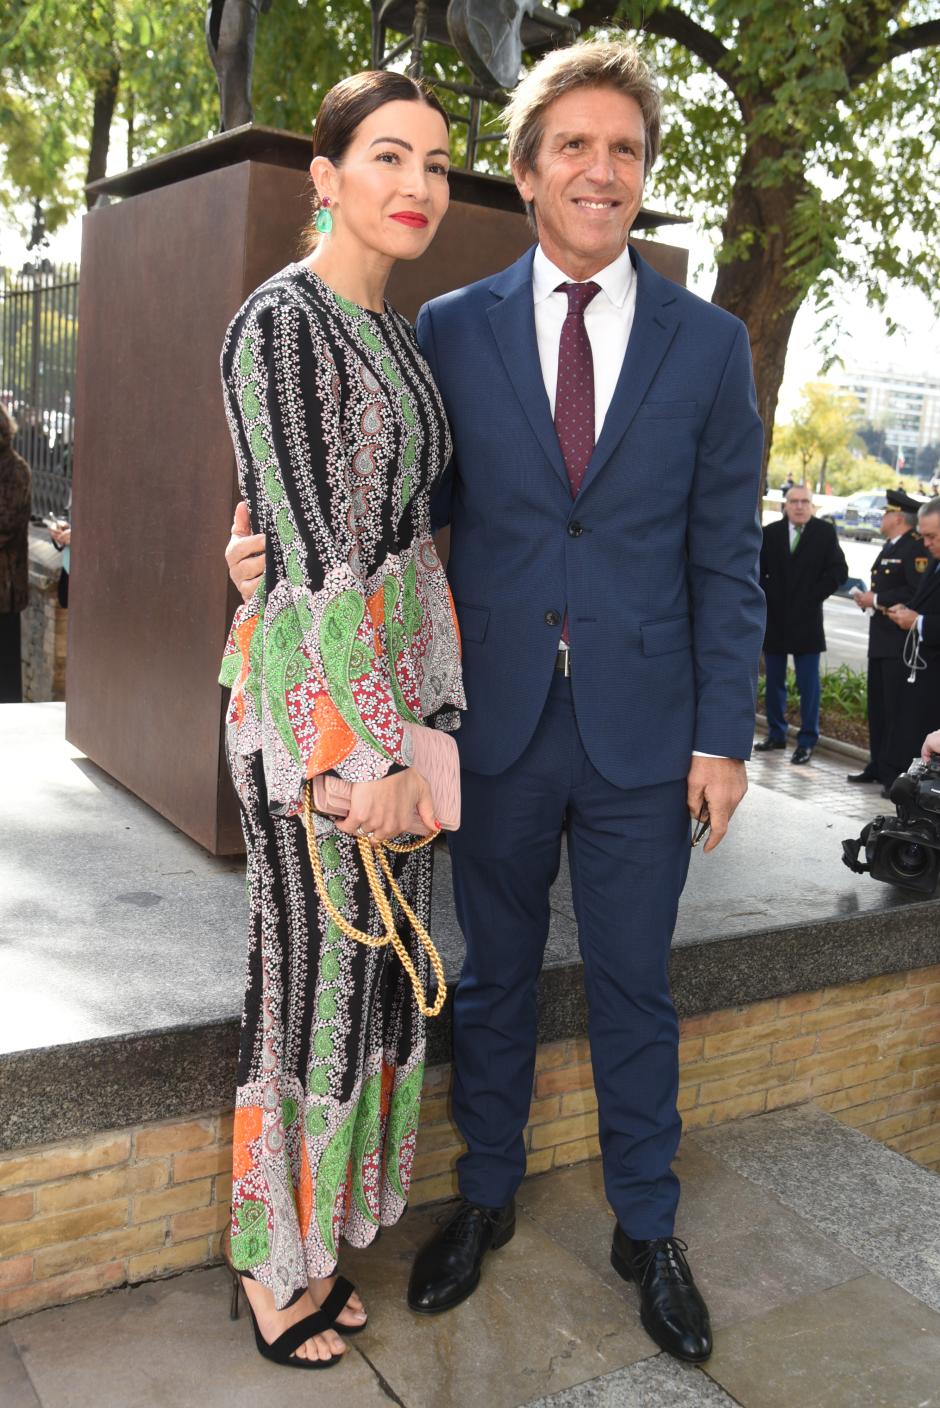 Manuel Diaz El Cordobes and Virginia Troconis during the gala of the delivery of the medals of Andalucia in Sevilla on Tuesday, 28 February 2023.